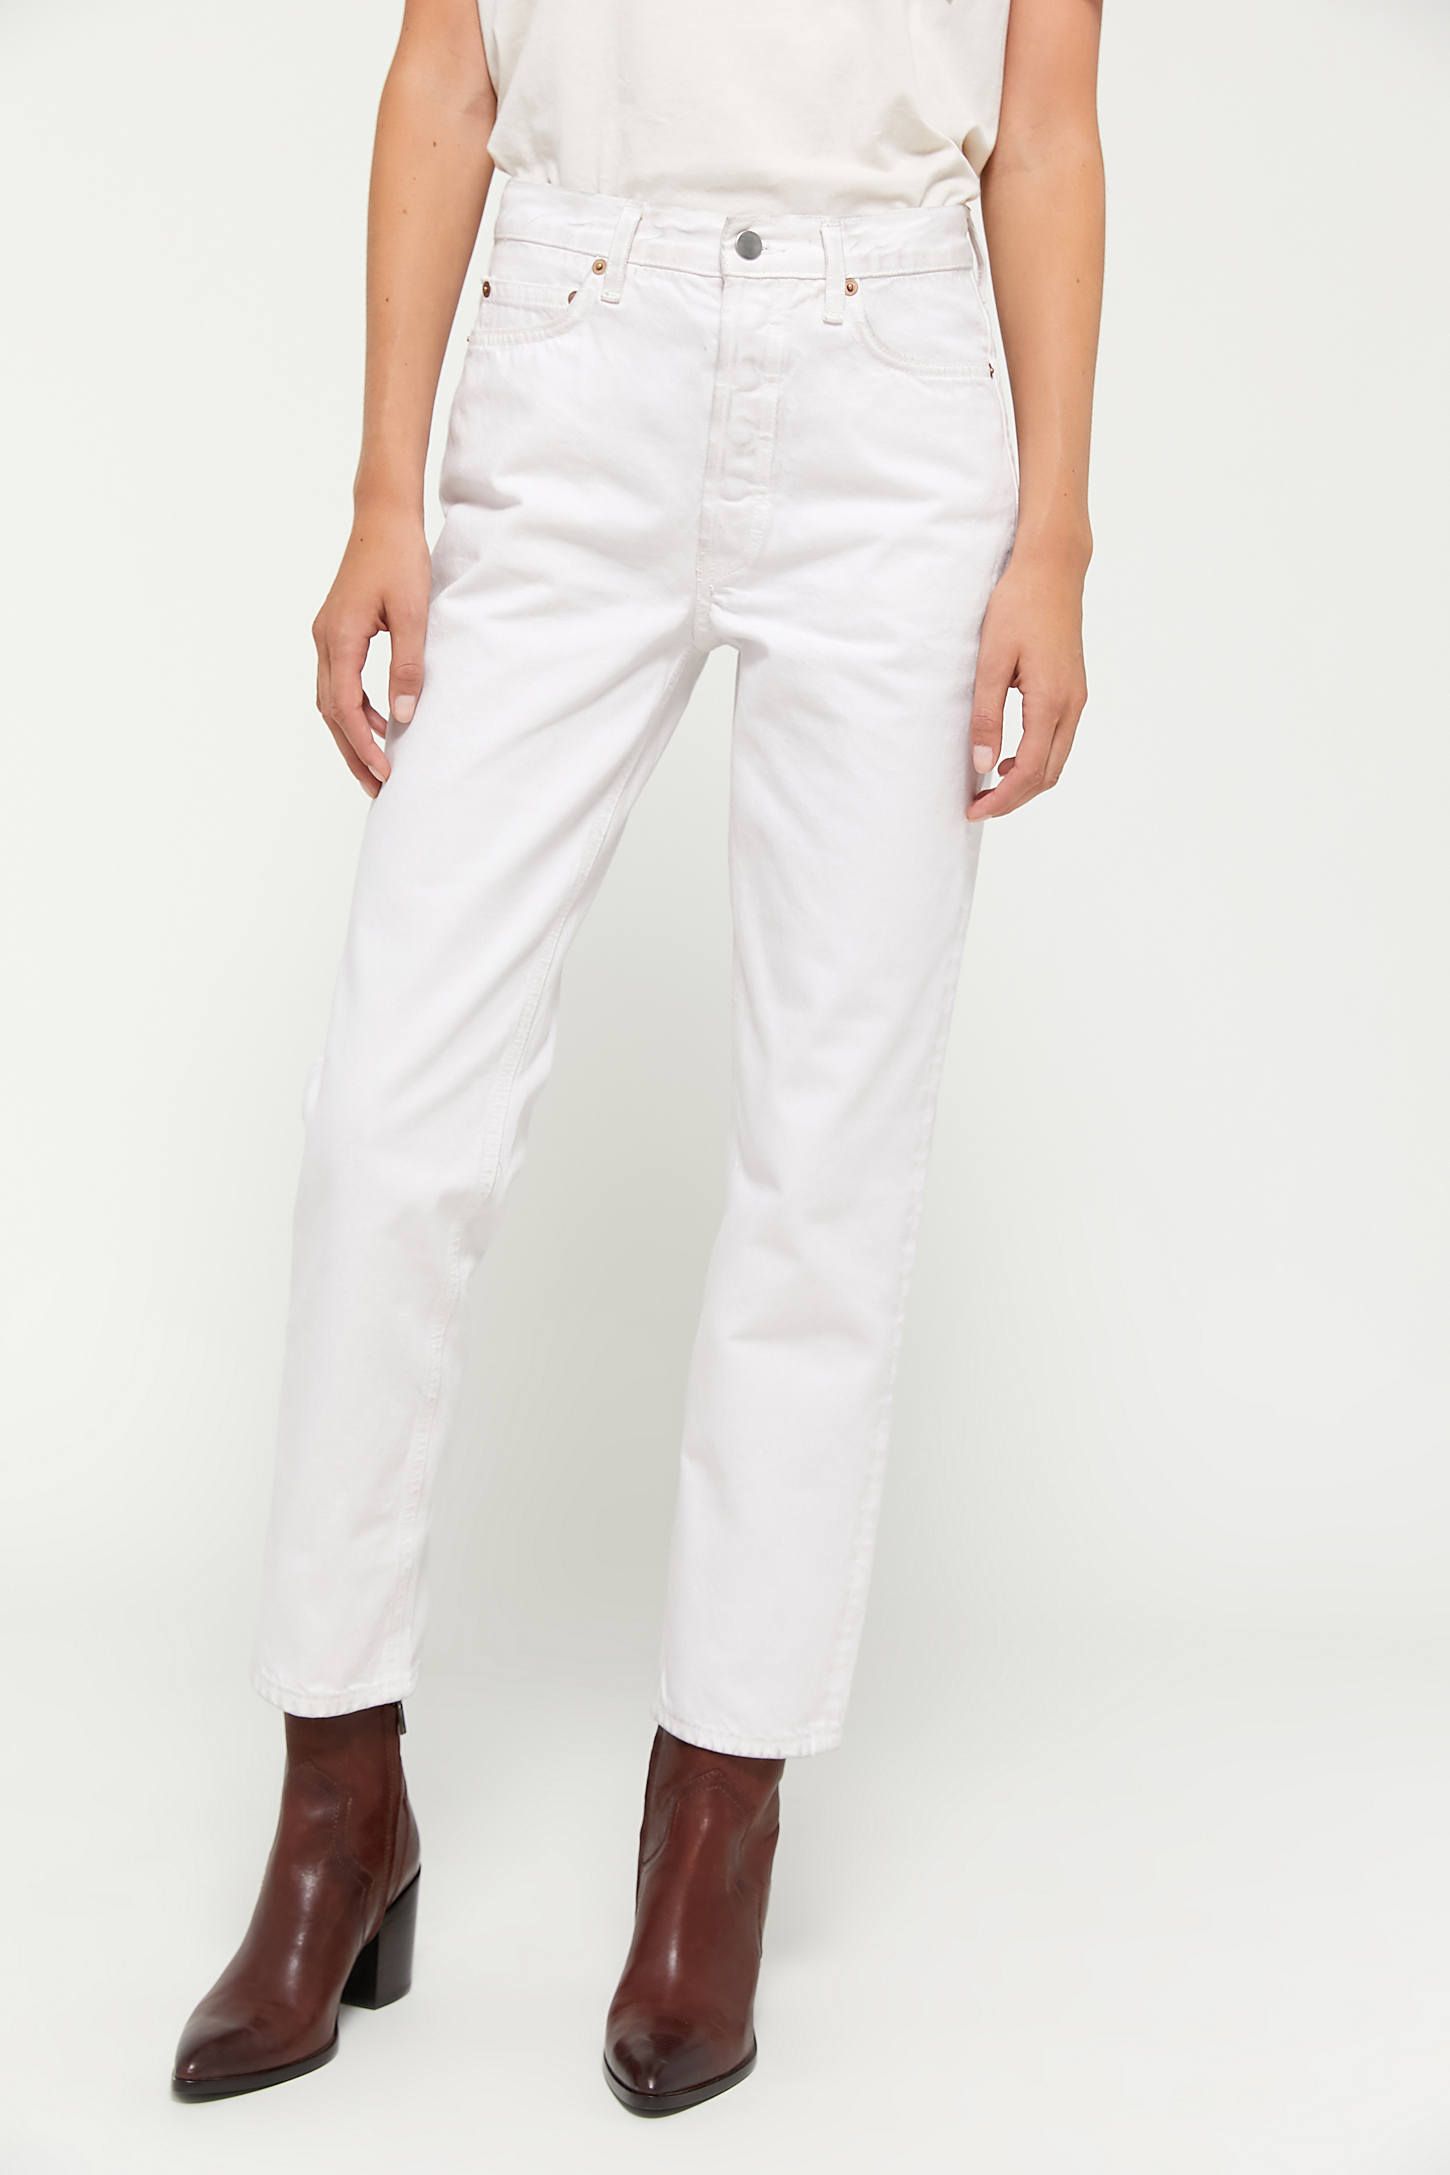 BDG Premium High-Waisted Straight Leg Jean – Ivory Denim | Urban Outfitters (US and RoW)